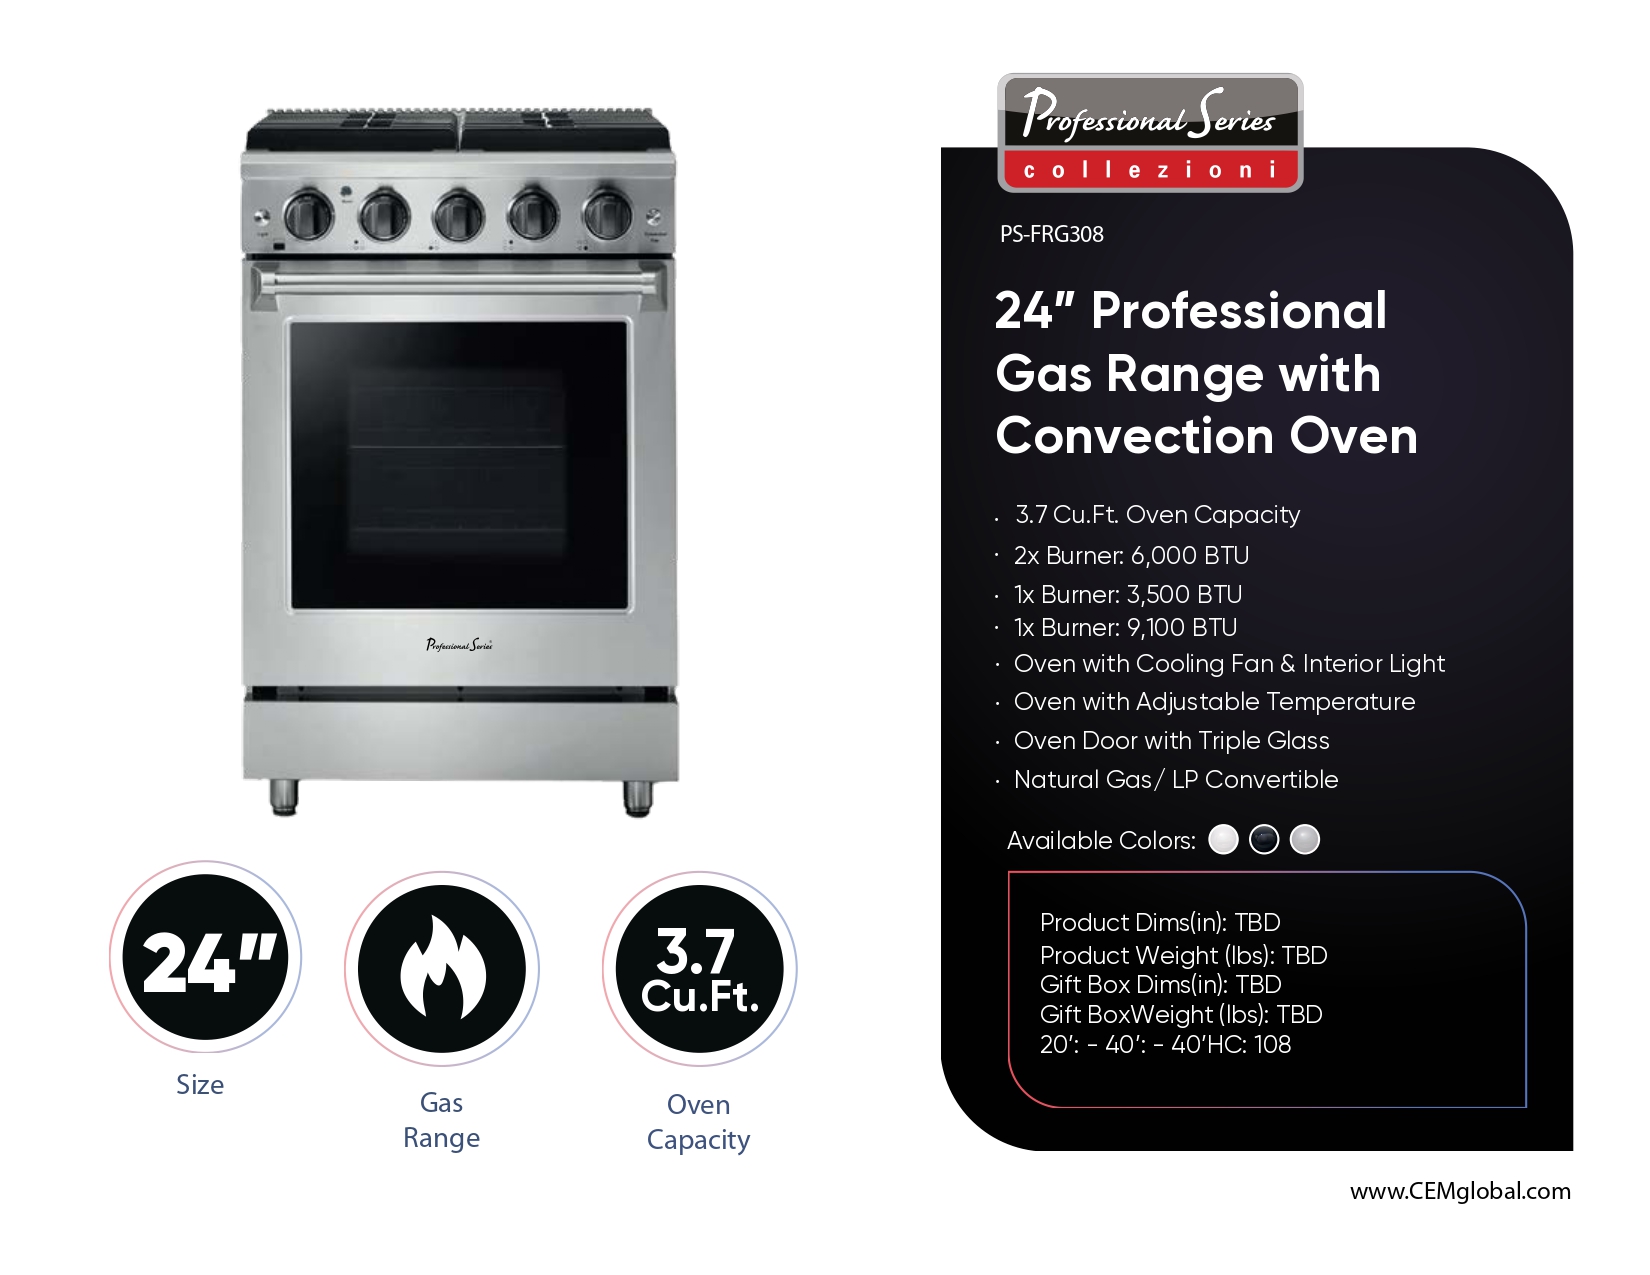 24” Professional Gas Range with Convection Oven